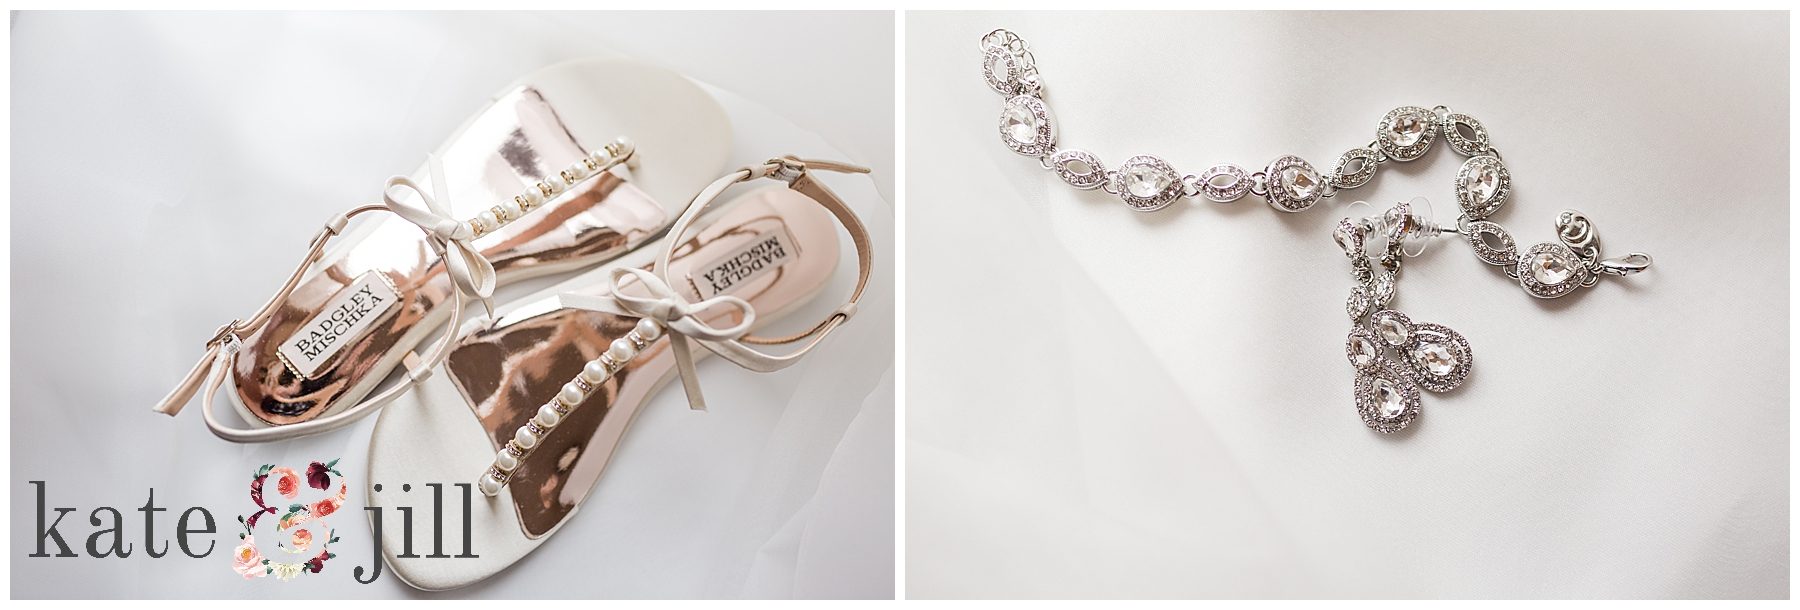 Wedding shoes and jewlery details